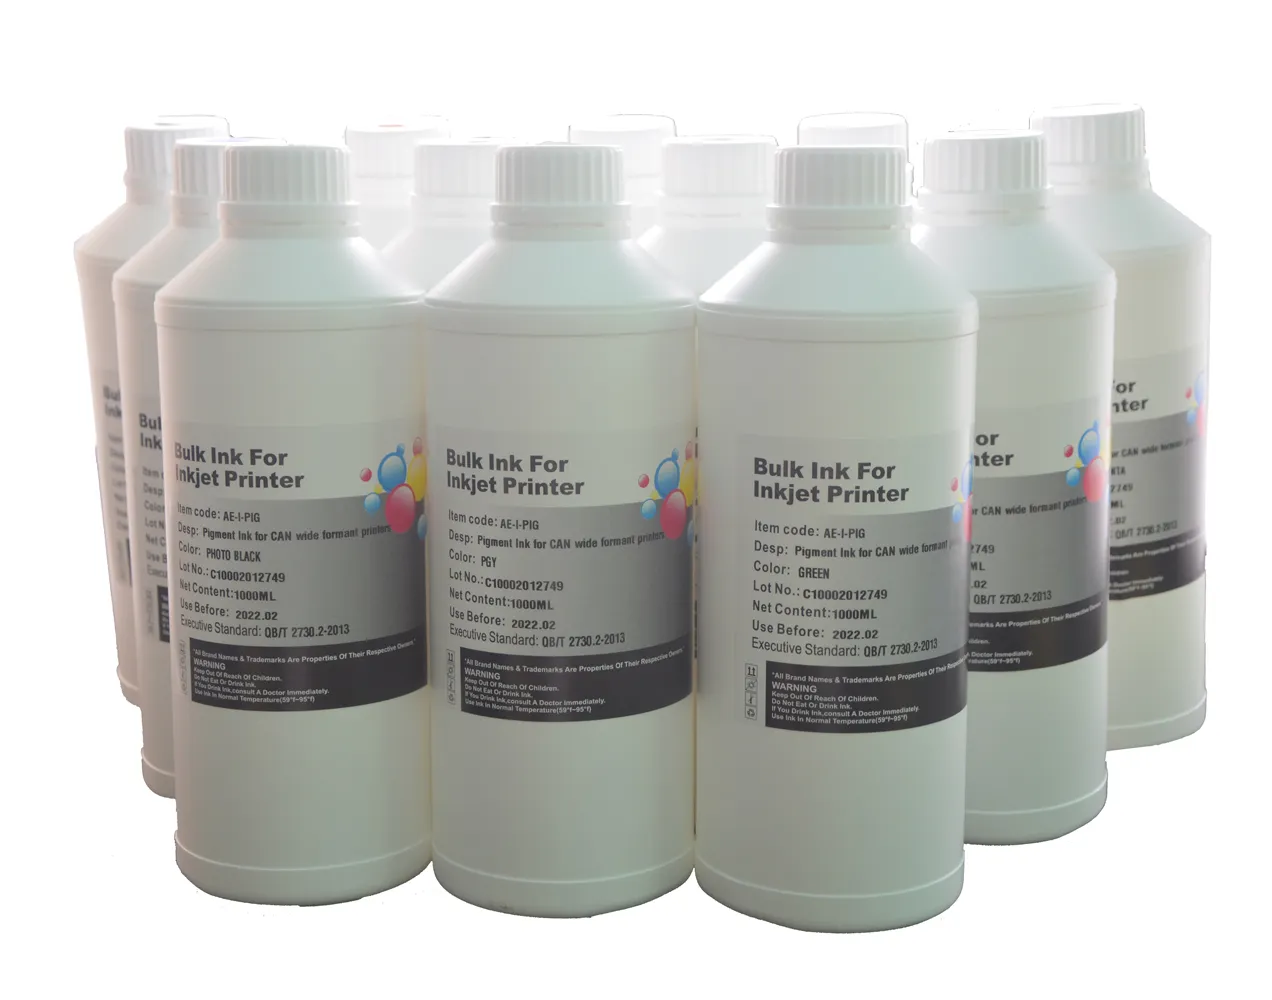 Aomya 1000ml Pigment ink for ink Cartridge PFI-1700 for Canon Pro2000/2100 Pro 4000s/4100 /6000s/6100/6100S/4100S